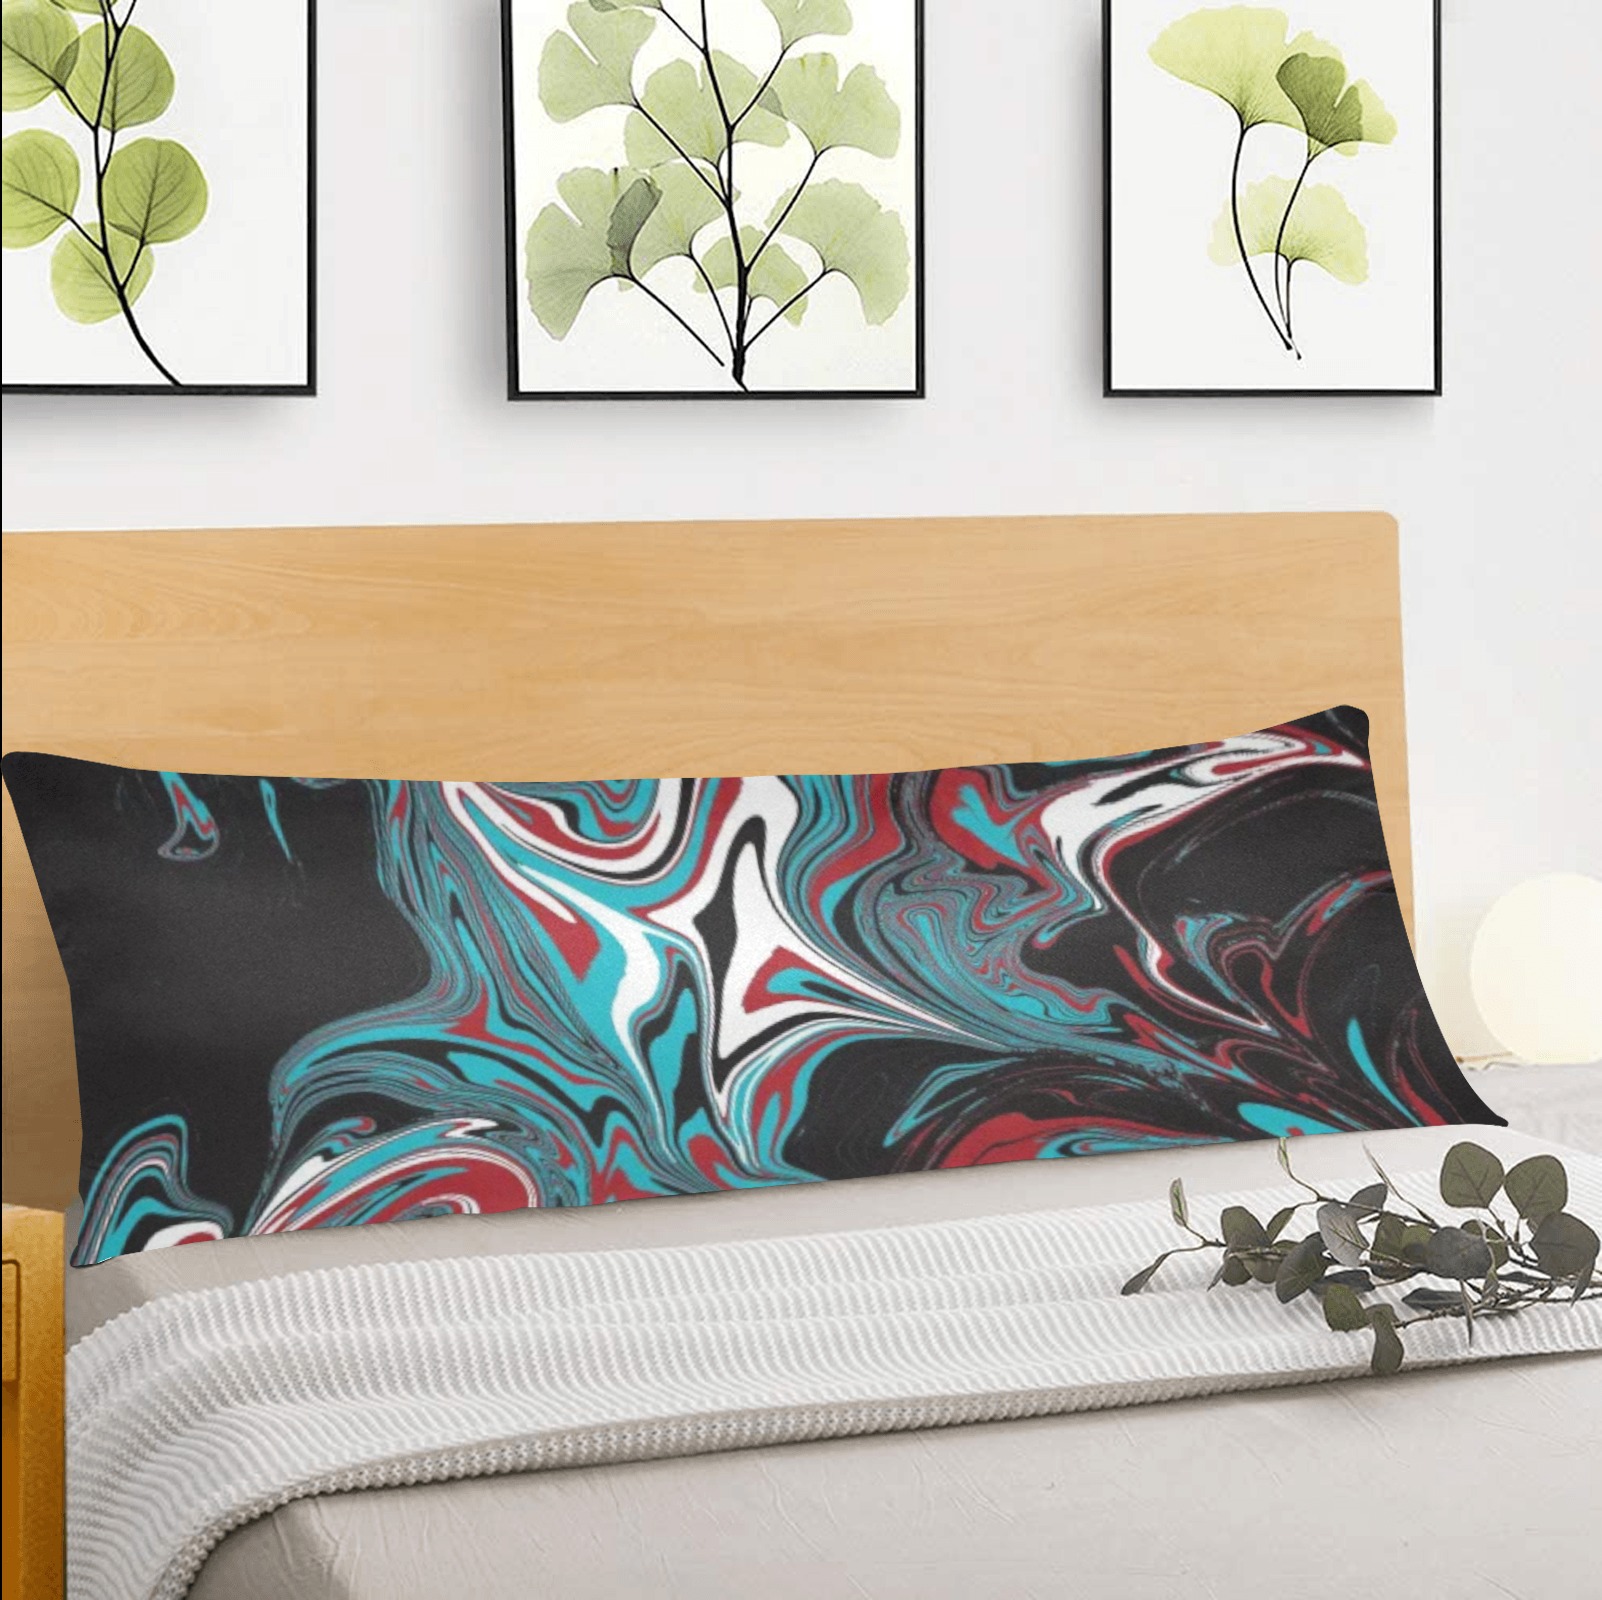 Dark Wave of Colors Body Pillow Case 20" x 54" (Two Sides)